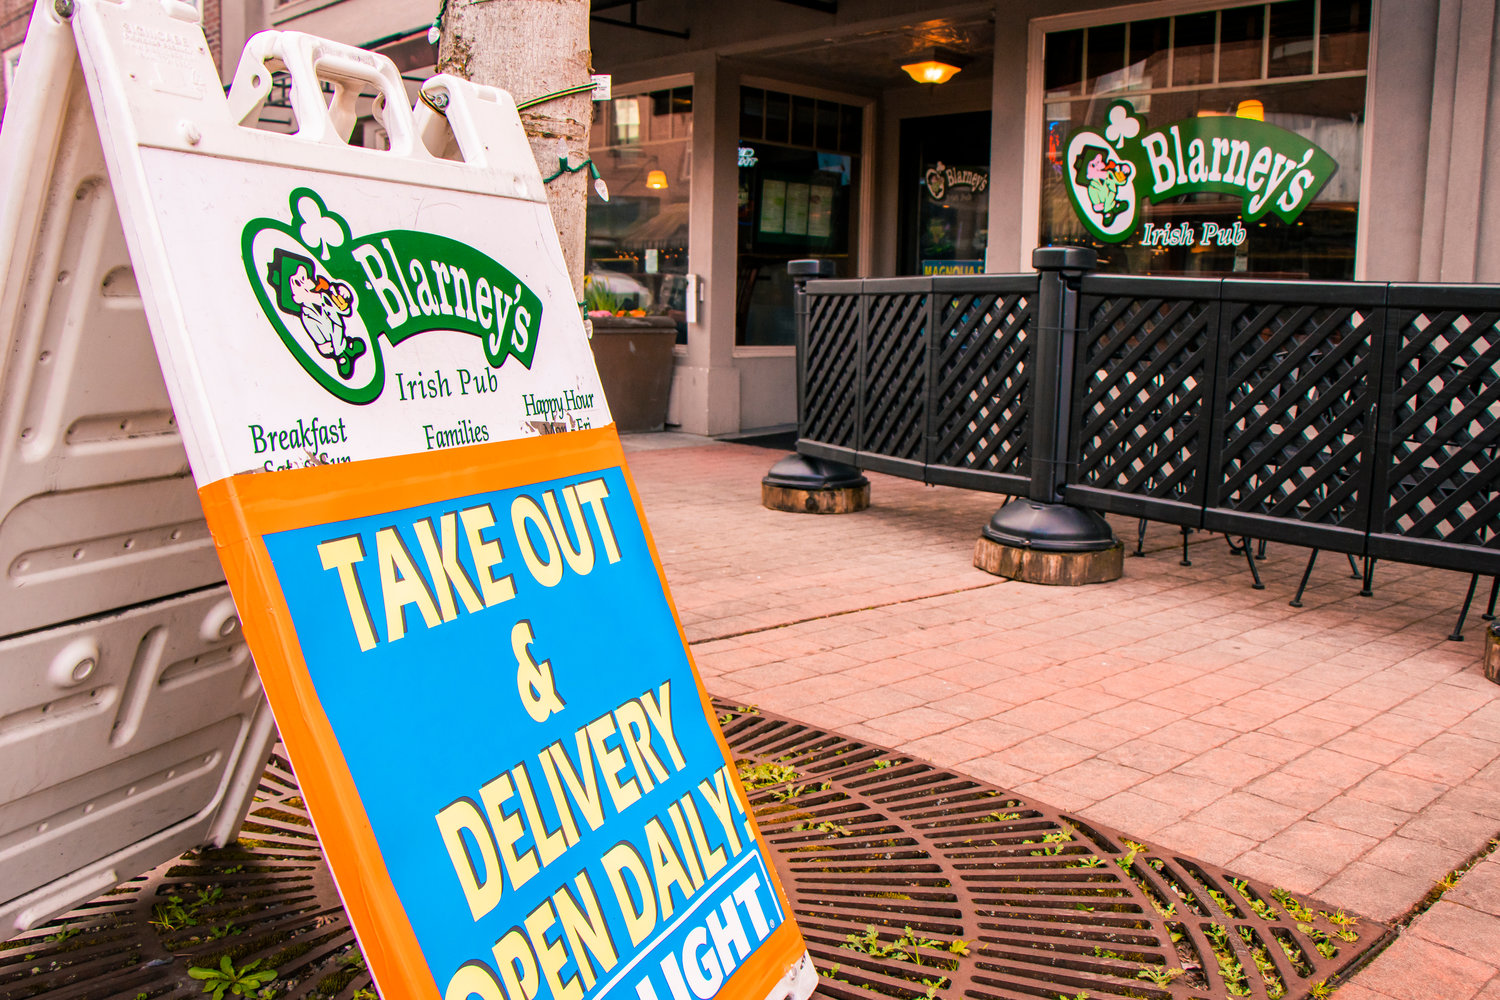 Take out and delivery are open daily at O’Blarney’s in Centralia seen Tuesday.